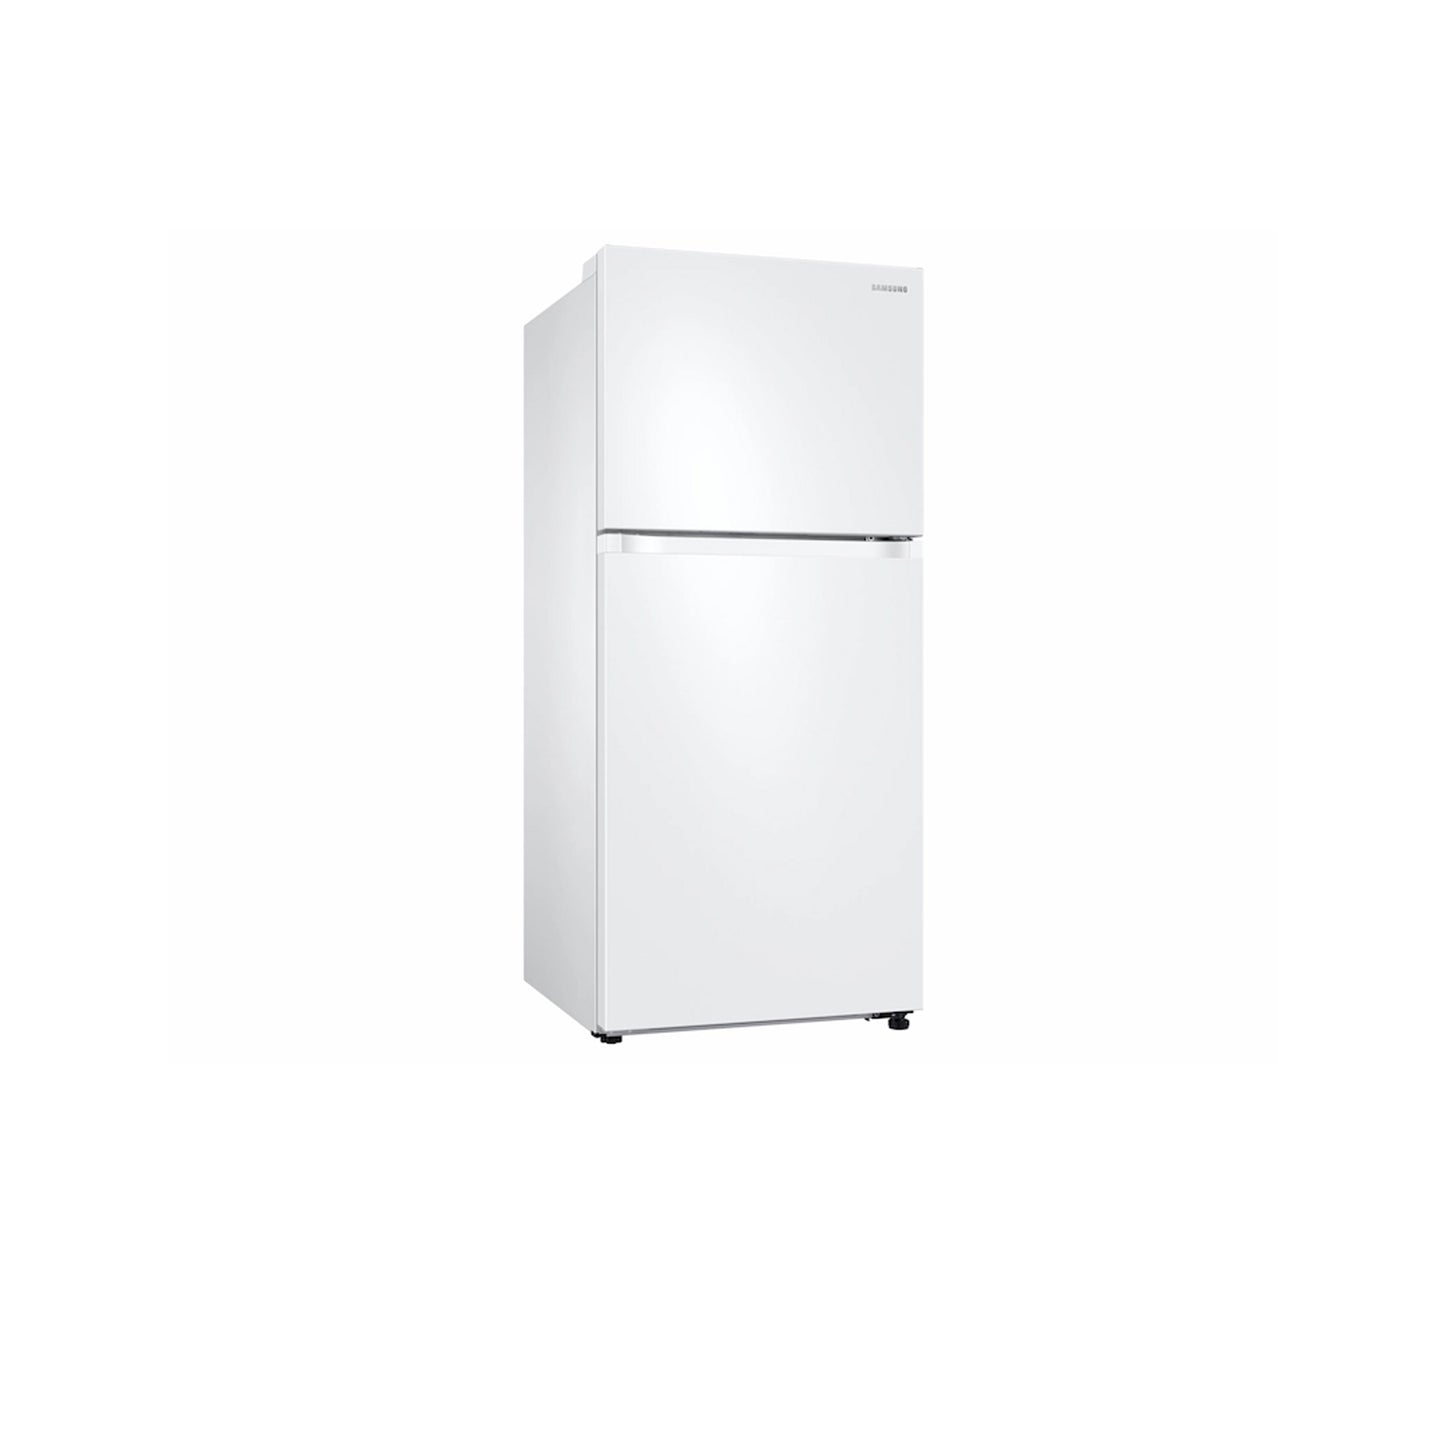 18 cu. ft. Top Freezer Refrigerator with FlexZone™ and Ice Maker in Black Stainless Steel.